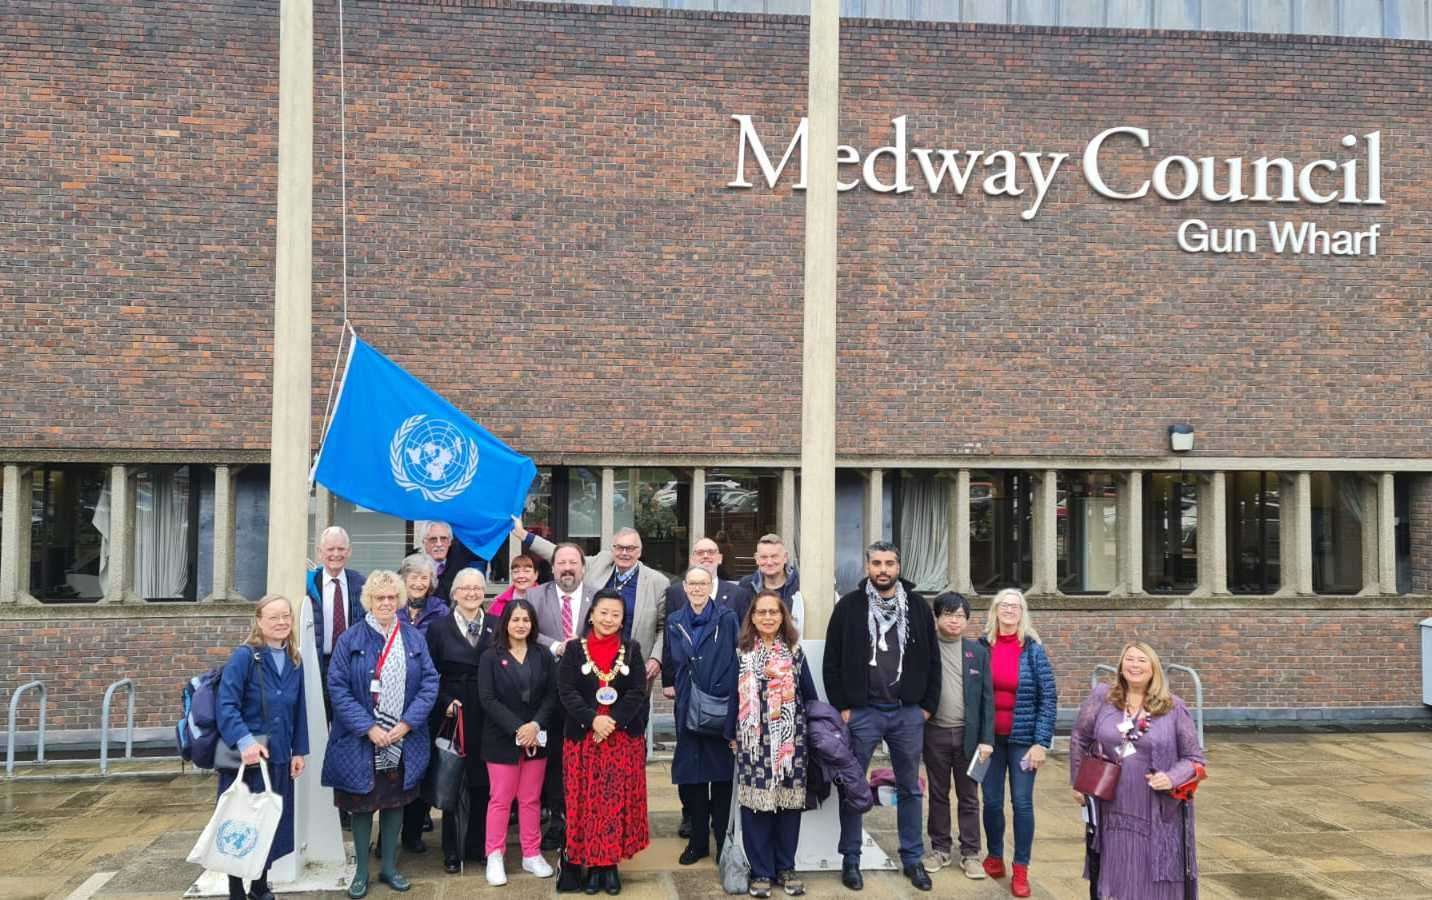 A flag raising ceremony was held at Medway Council offices in Gun Wharf